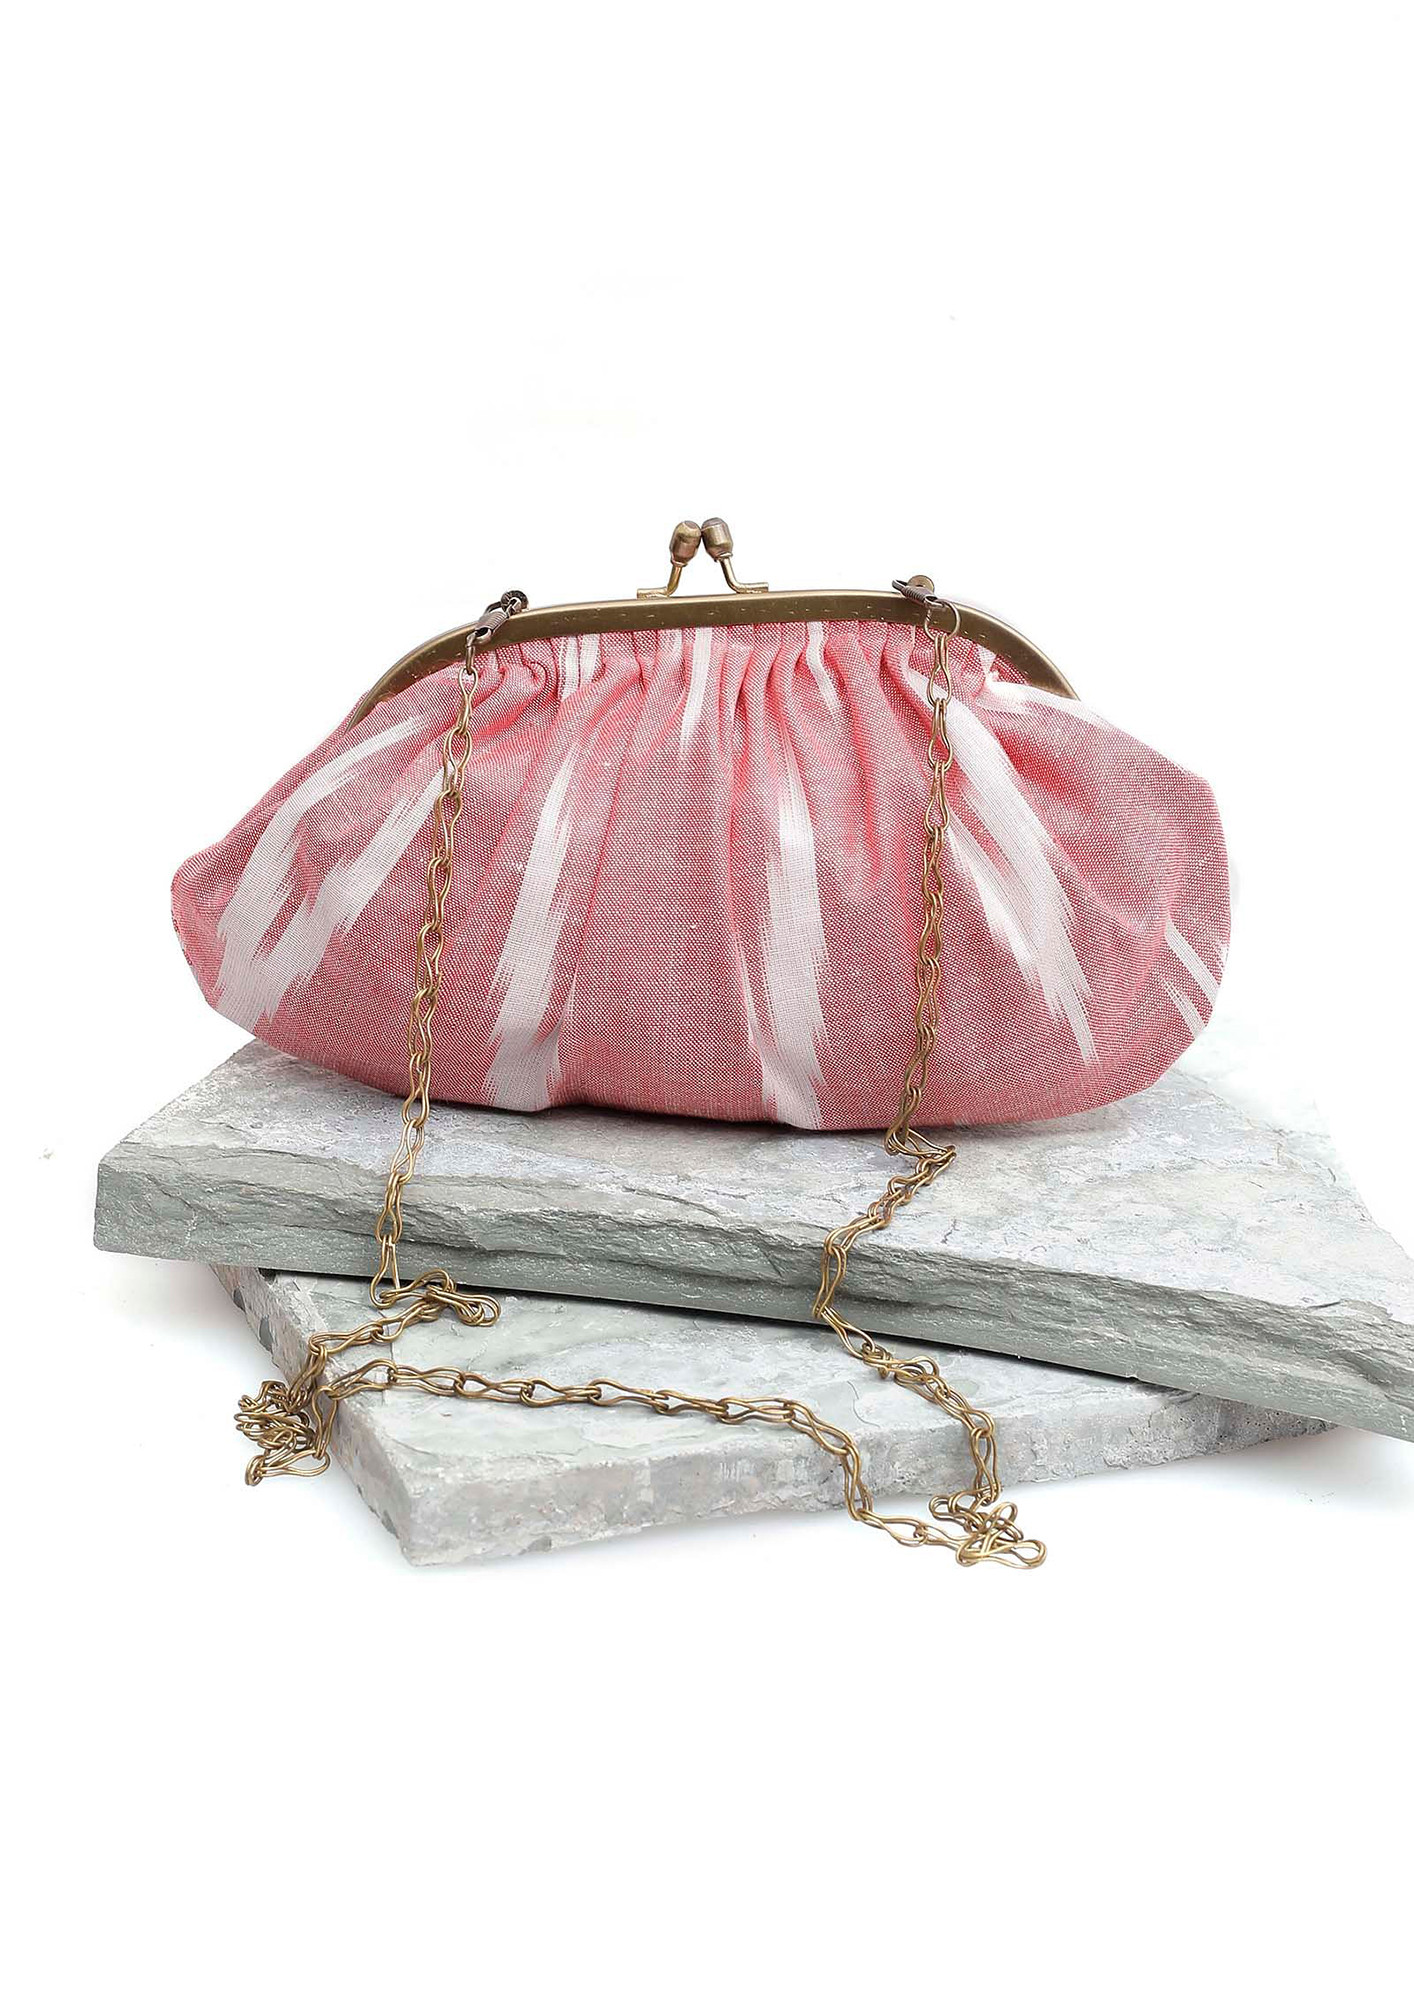 Buy Zardozi Velvet Pink Embroidered Clutch Purse, Bag With Designer  Pattern, Shoulder Strap and Handle for Wedding, Evening Party & Ethnic  Wear. Online in India - Etsy